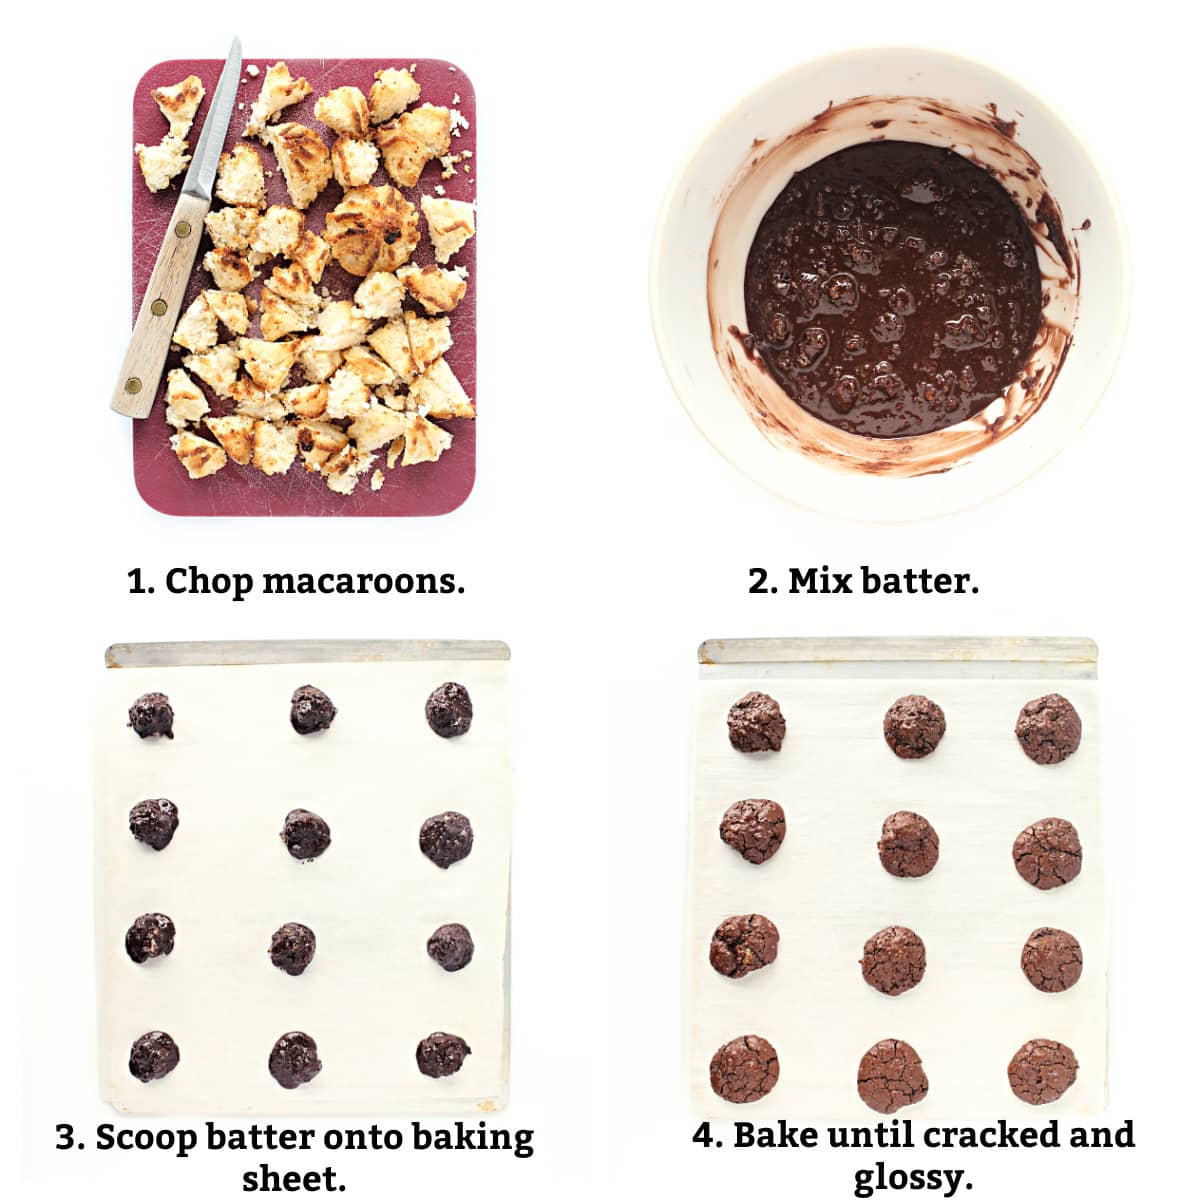 Instructions: chop macaroons, mix batter, scoop batter onto baking sheet, bake until tops are glossy.